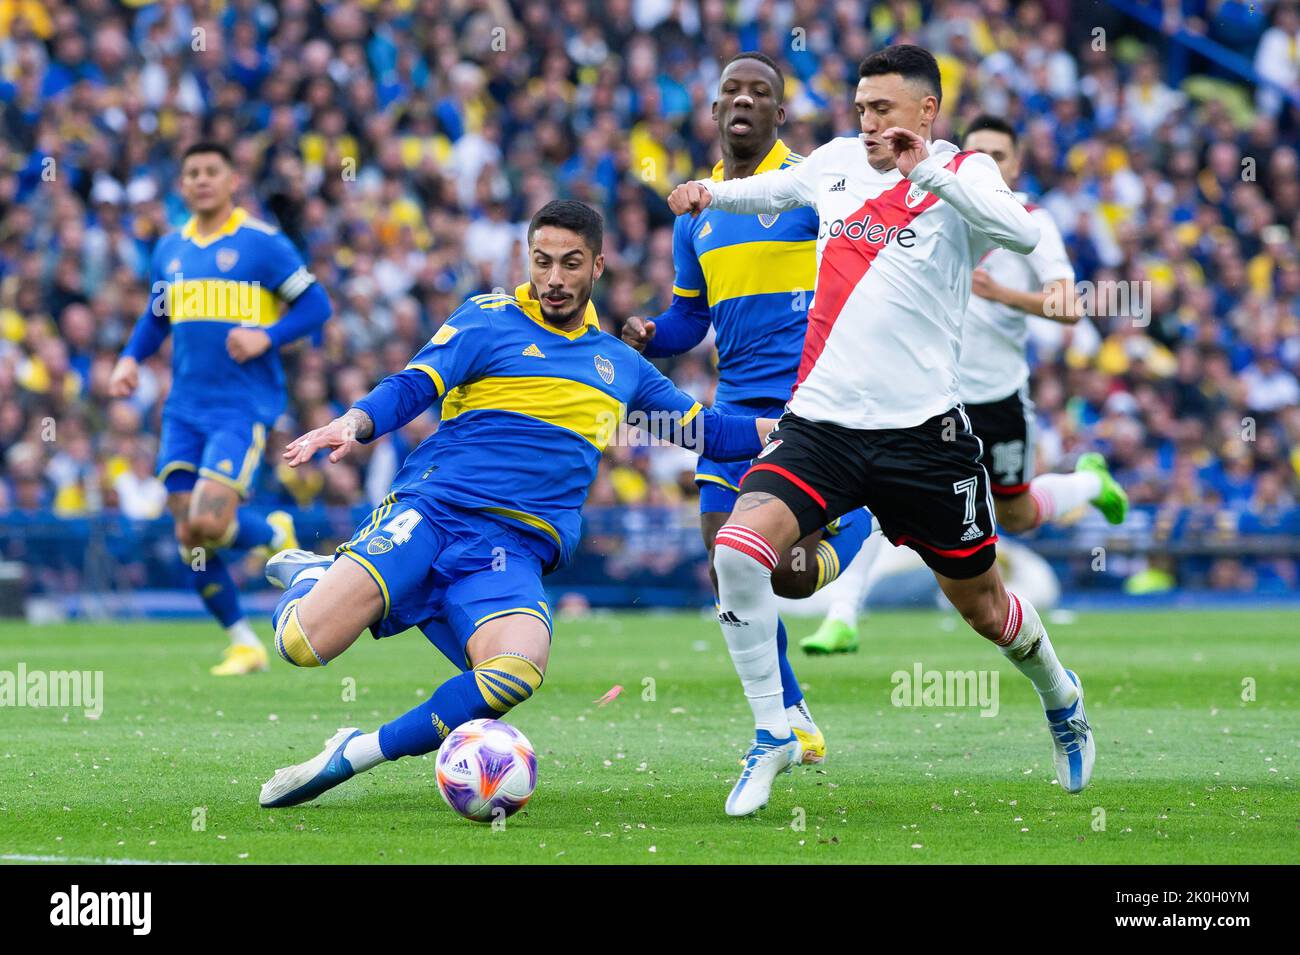 Buenos Aires, Argentina. 11th Sep, 2022. Matias Suarez (R) of River Plate and Jorge Nicolás Figal (L) of Boca Juniors seen in action during a match between Boca Juniors and River Plate as part of Liga Profesional 2022 at Estadio Alberto J. Armando.(Final score; Boca Juniors 1:0 River Plate) (Photo by Manuel Cortina/SOPA Images/Sipa USA) Credit: Sipa USA/Alamy Live News Stock Photo